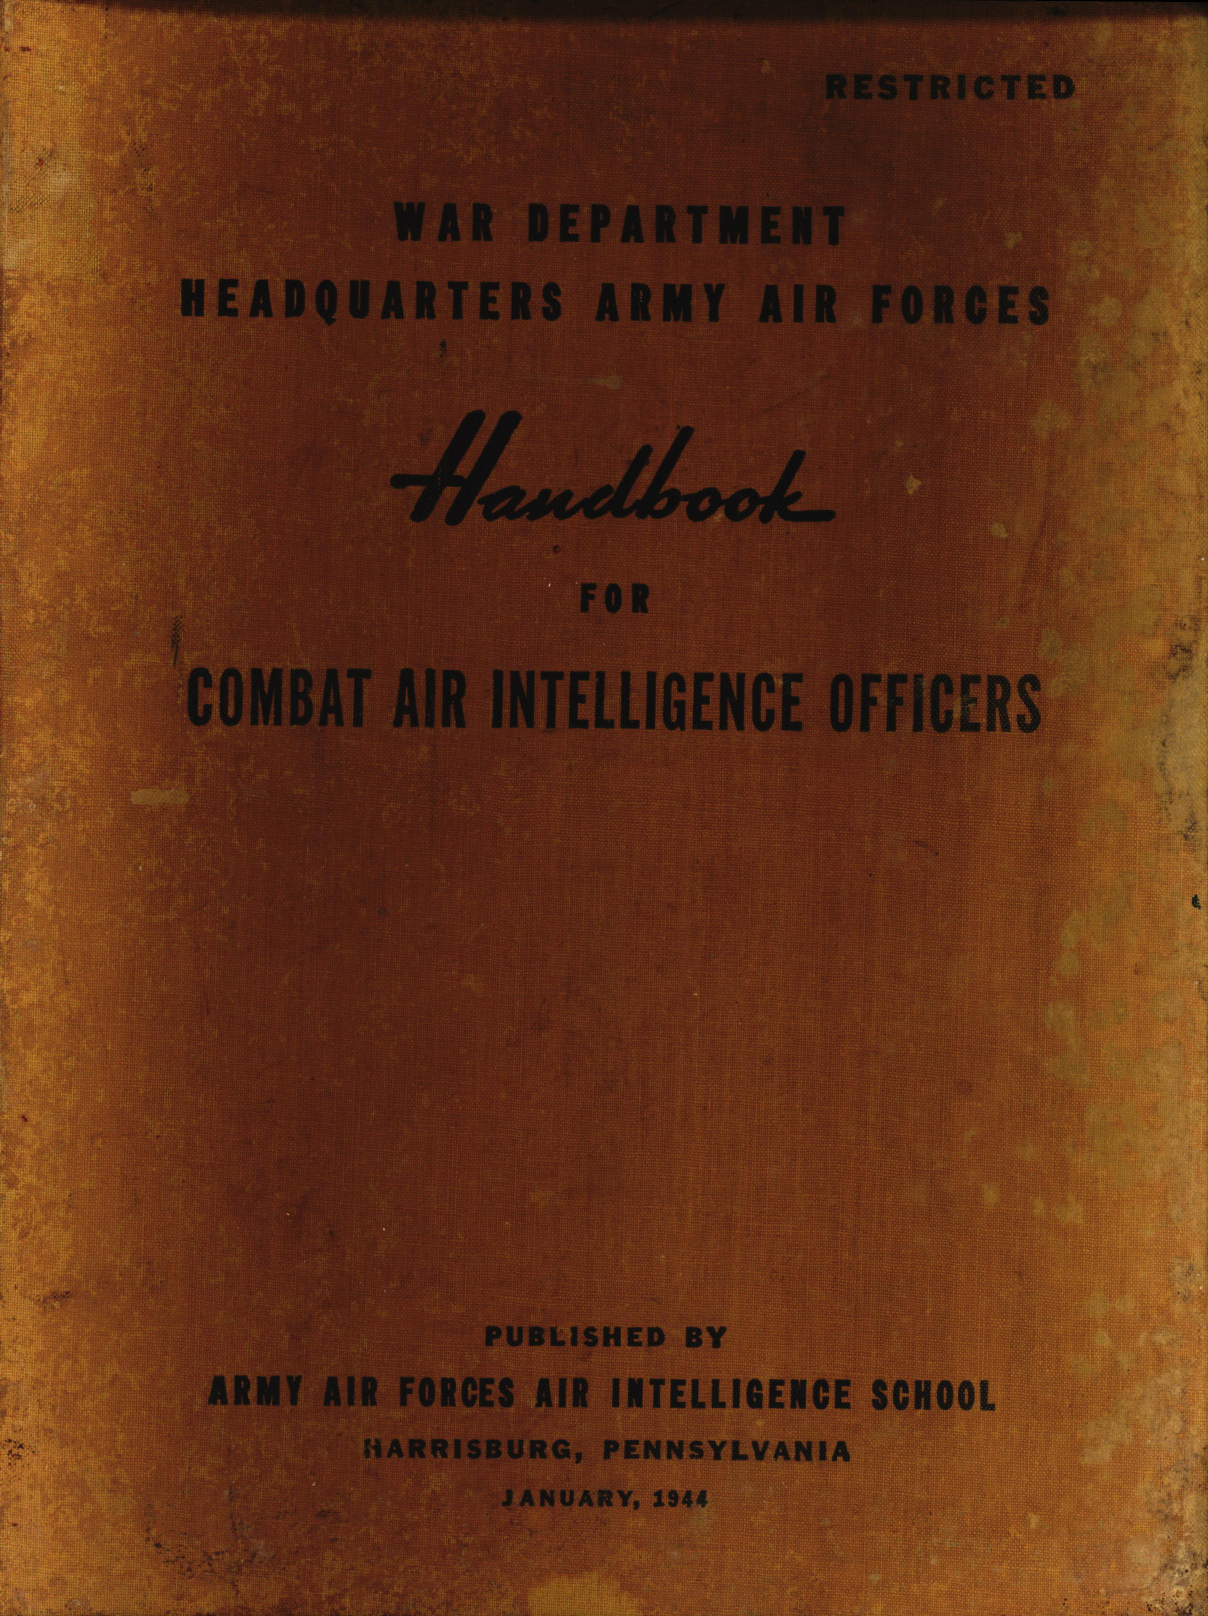 Sample page 1 from AirCorps Library document: Handbook for Combat Air Intelligence Officers